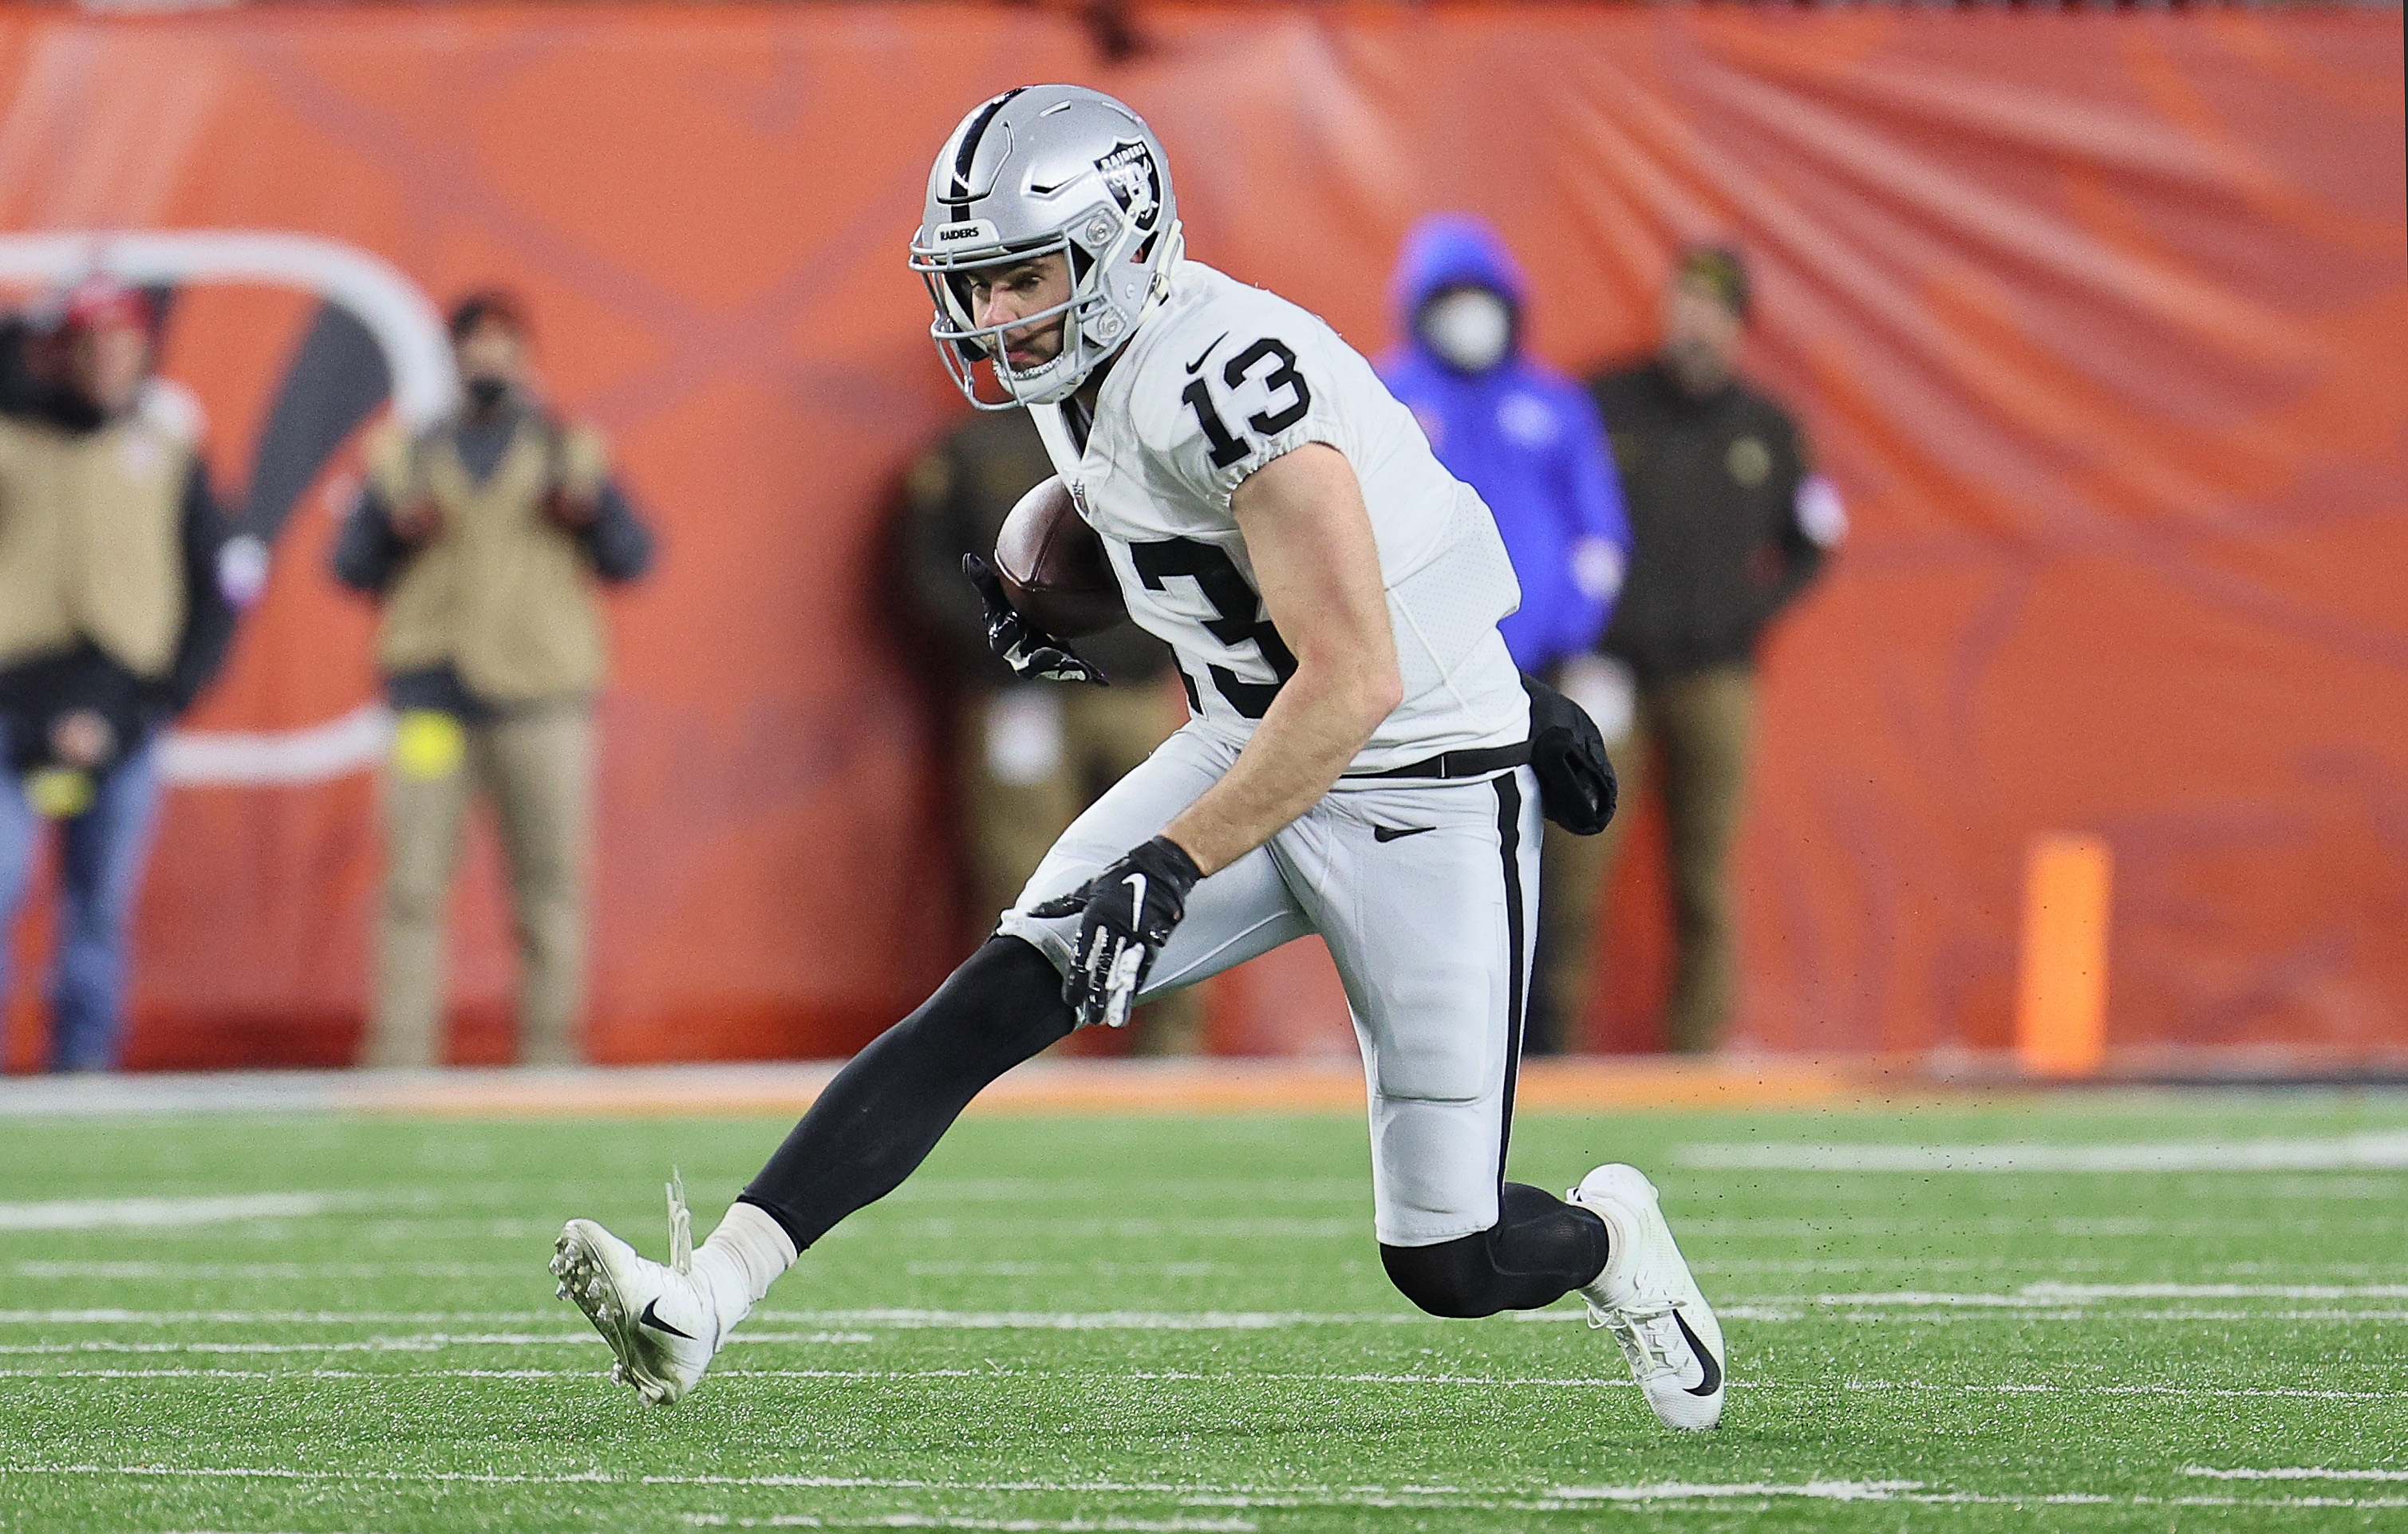 Hunter Renfrow #13 of the Las Vegas Raiders against the Cincinnati Bengals during the AFC Wild Card Playoff game at Paul Brown Stadium on January 15, 2022 in Cincinnati, Ohio.